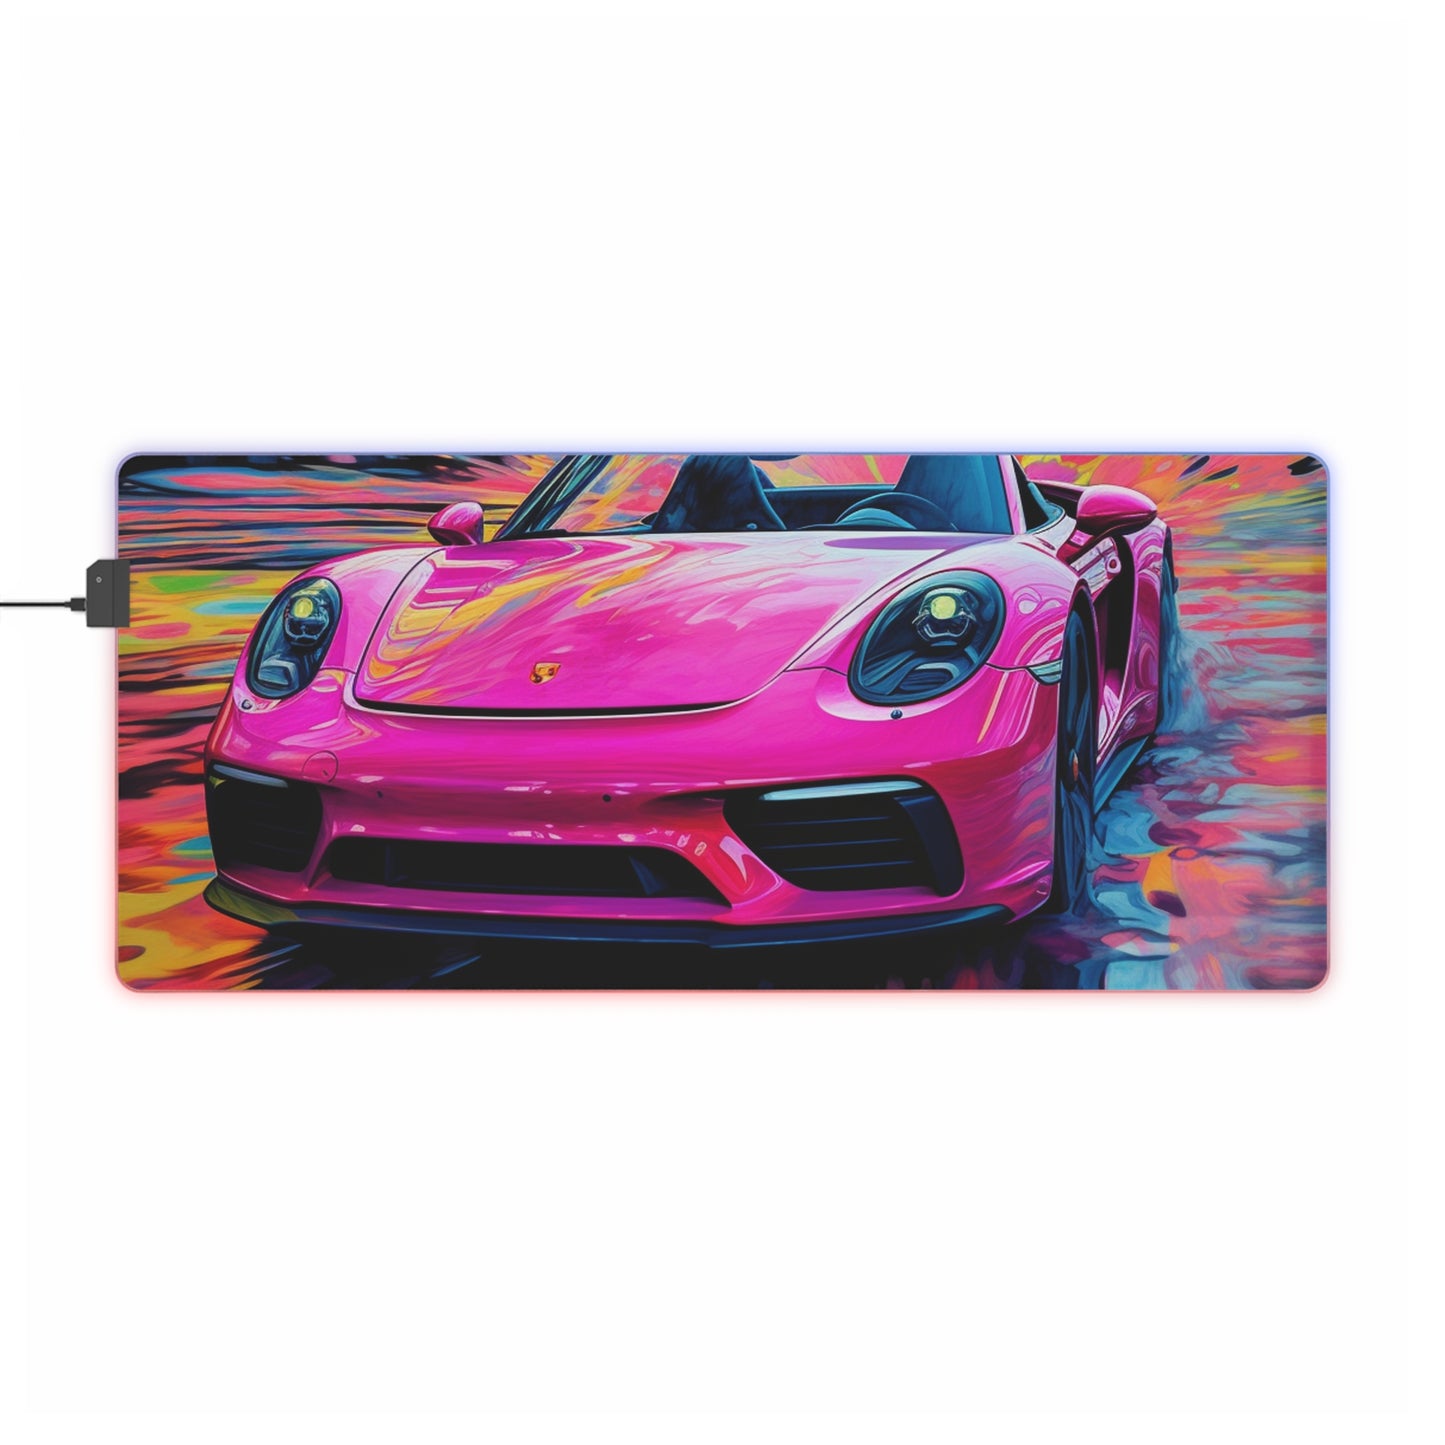 LED Gaming Mouse Pad Pink Porsche water fusion 2